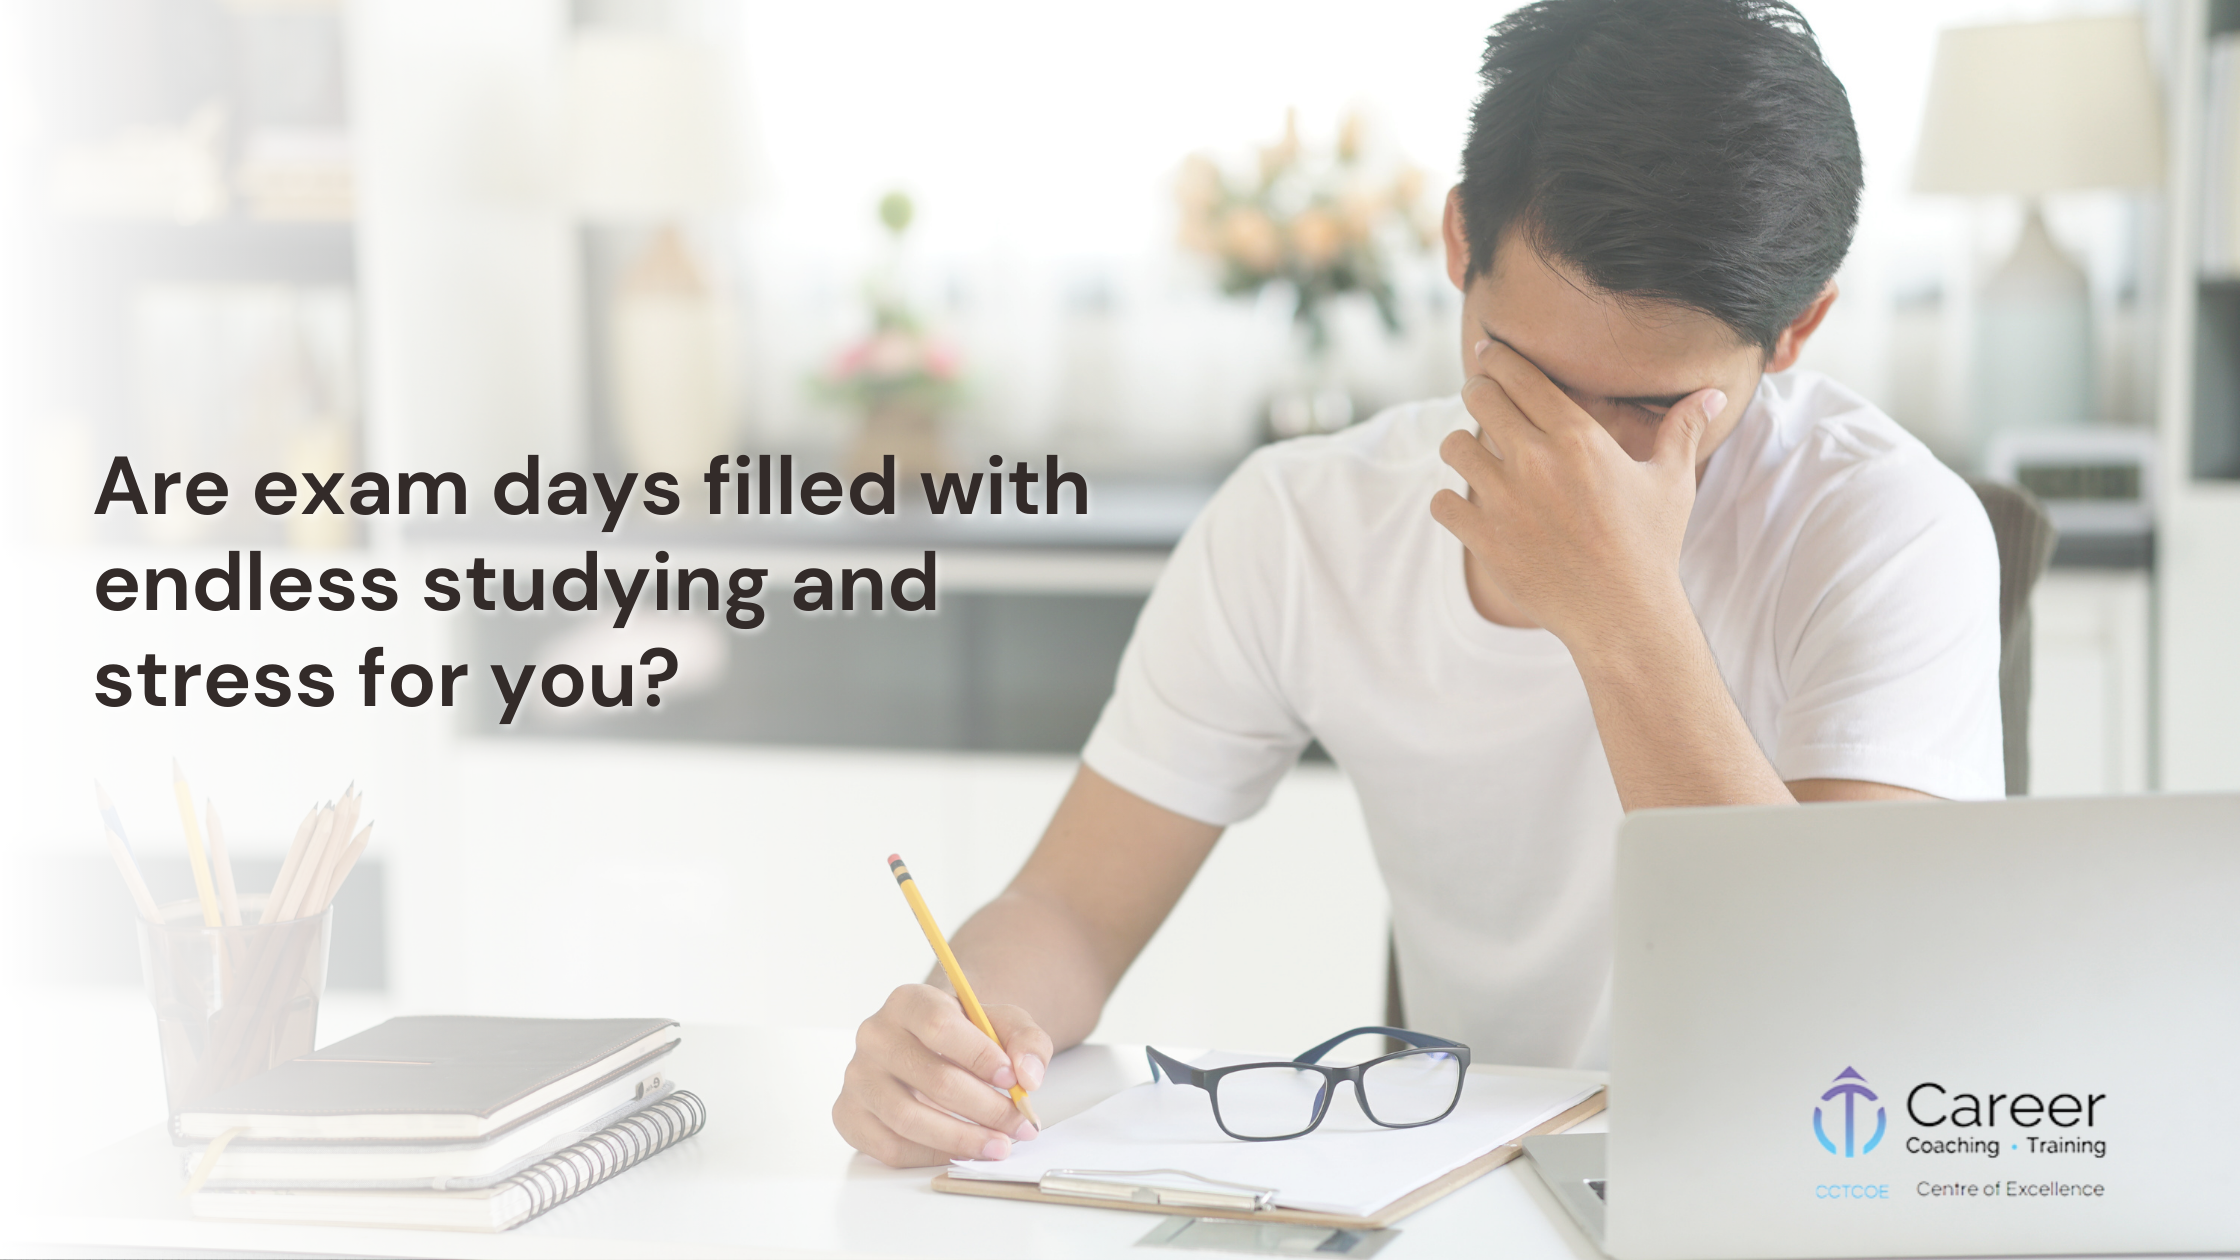 Are exam days filled with endless studying and stress for you?